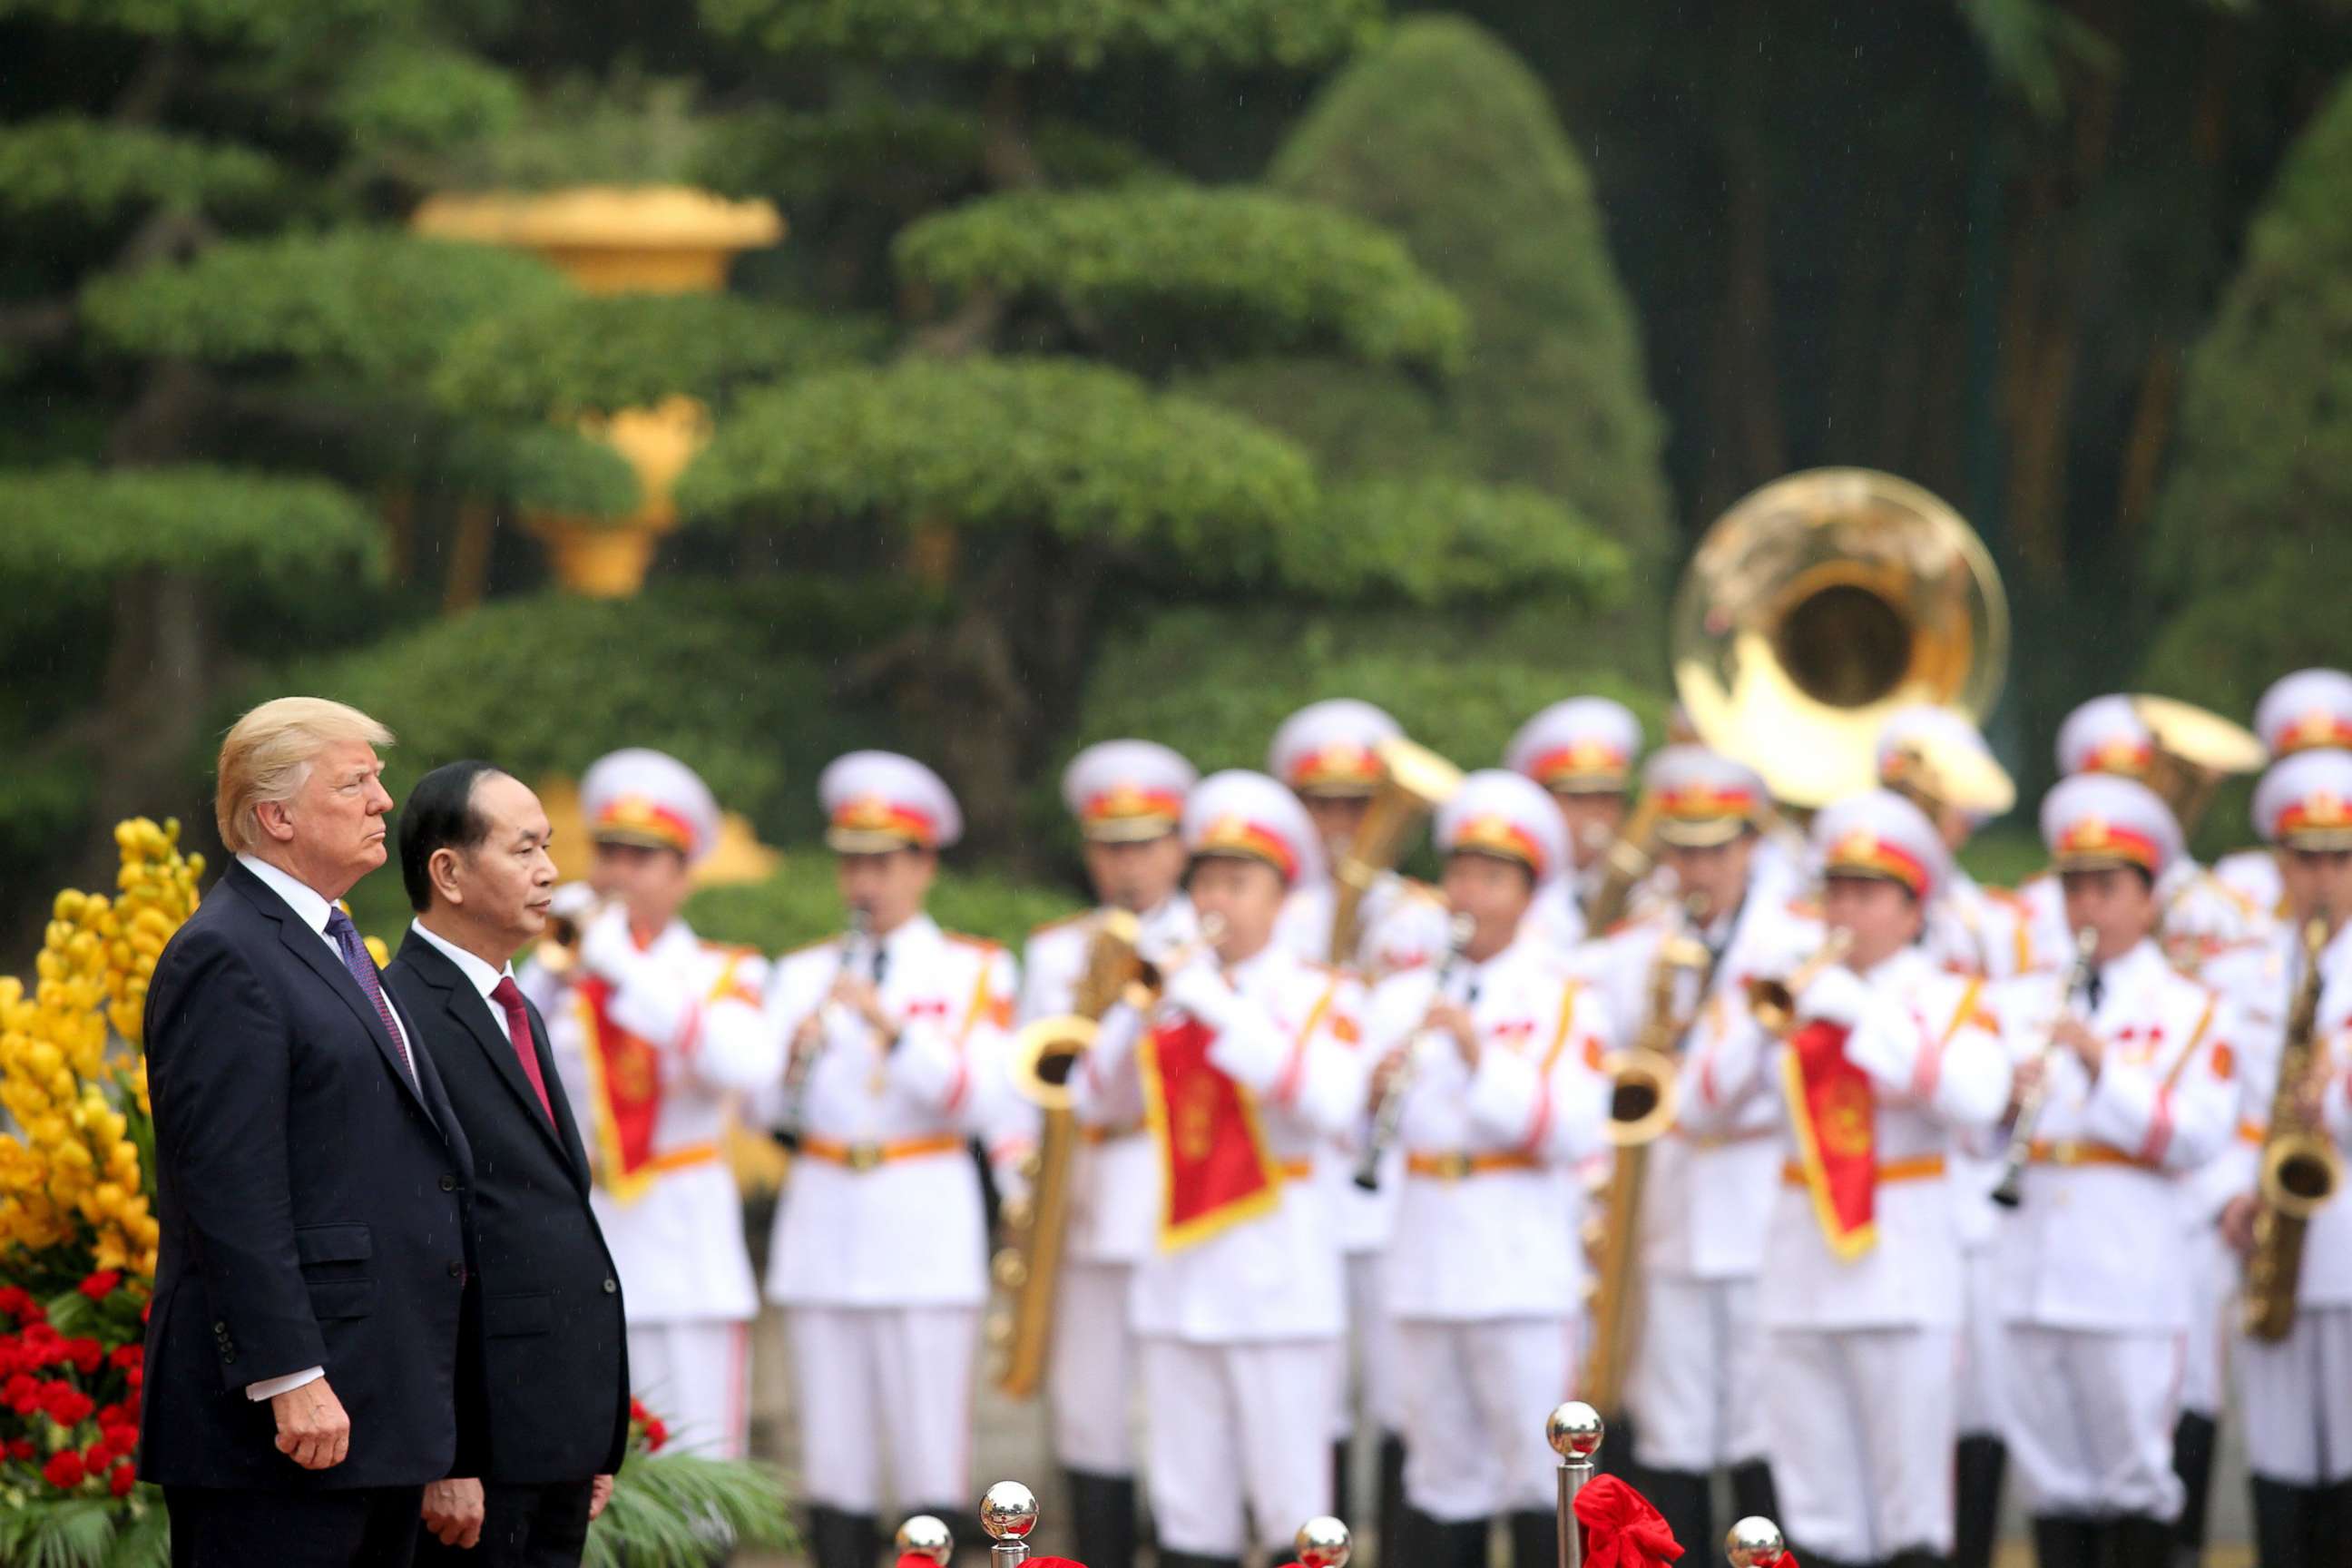 PHOTO: President Donald Trump, accompanied by Vietnamese President Tran Dai Quang, observe the playing of national anthems during a welcoming ceremony at the Presidential Palace in Hanoi, Nov. 12, 2017.